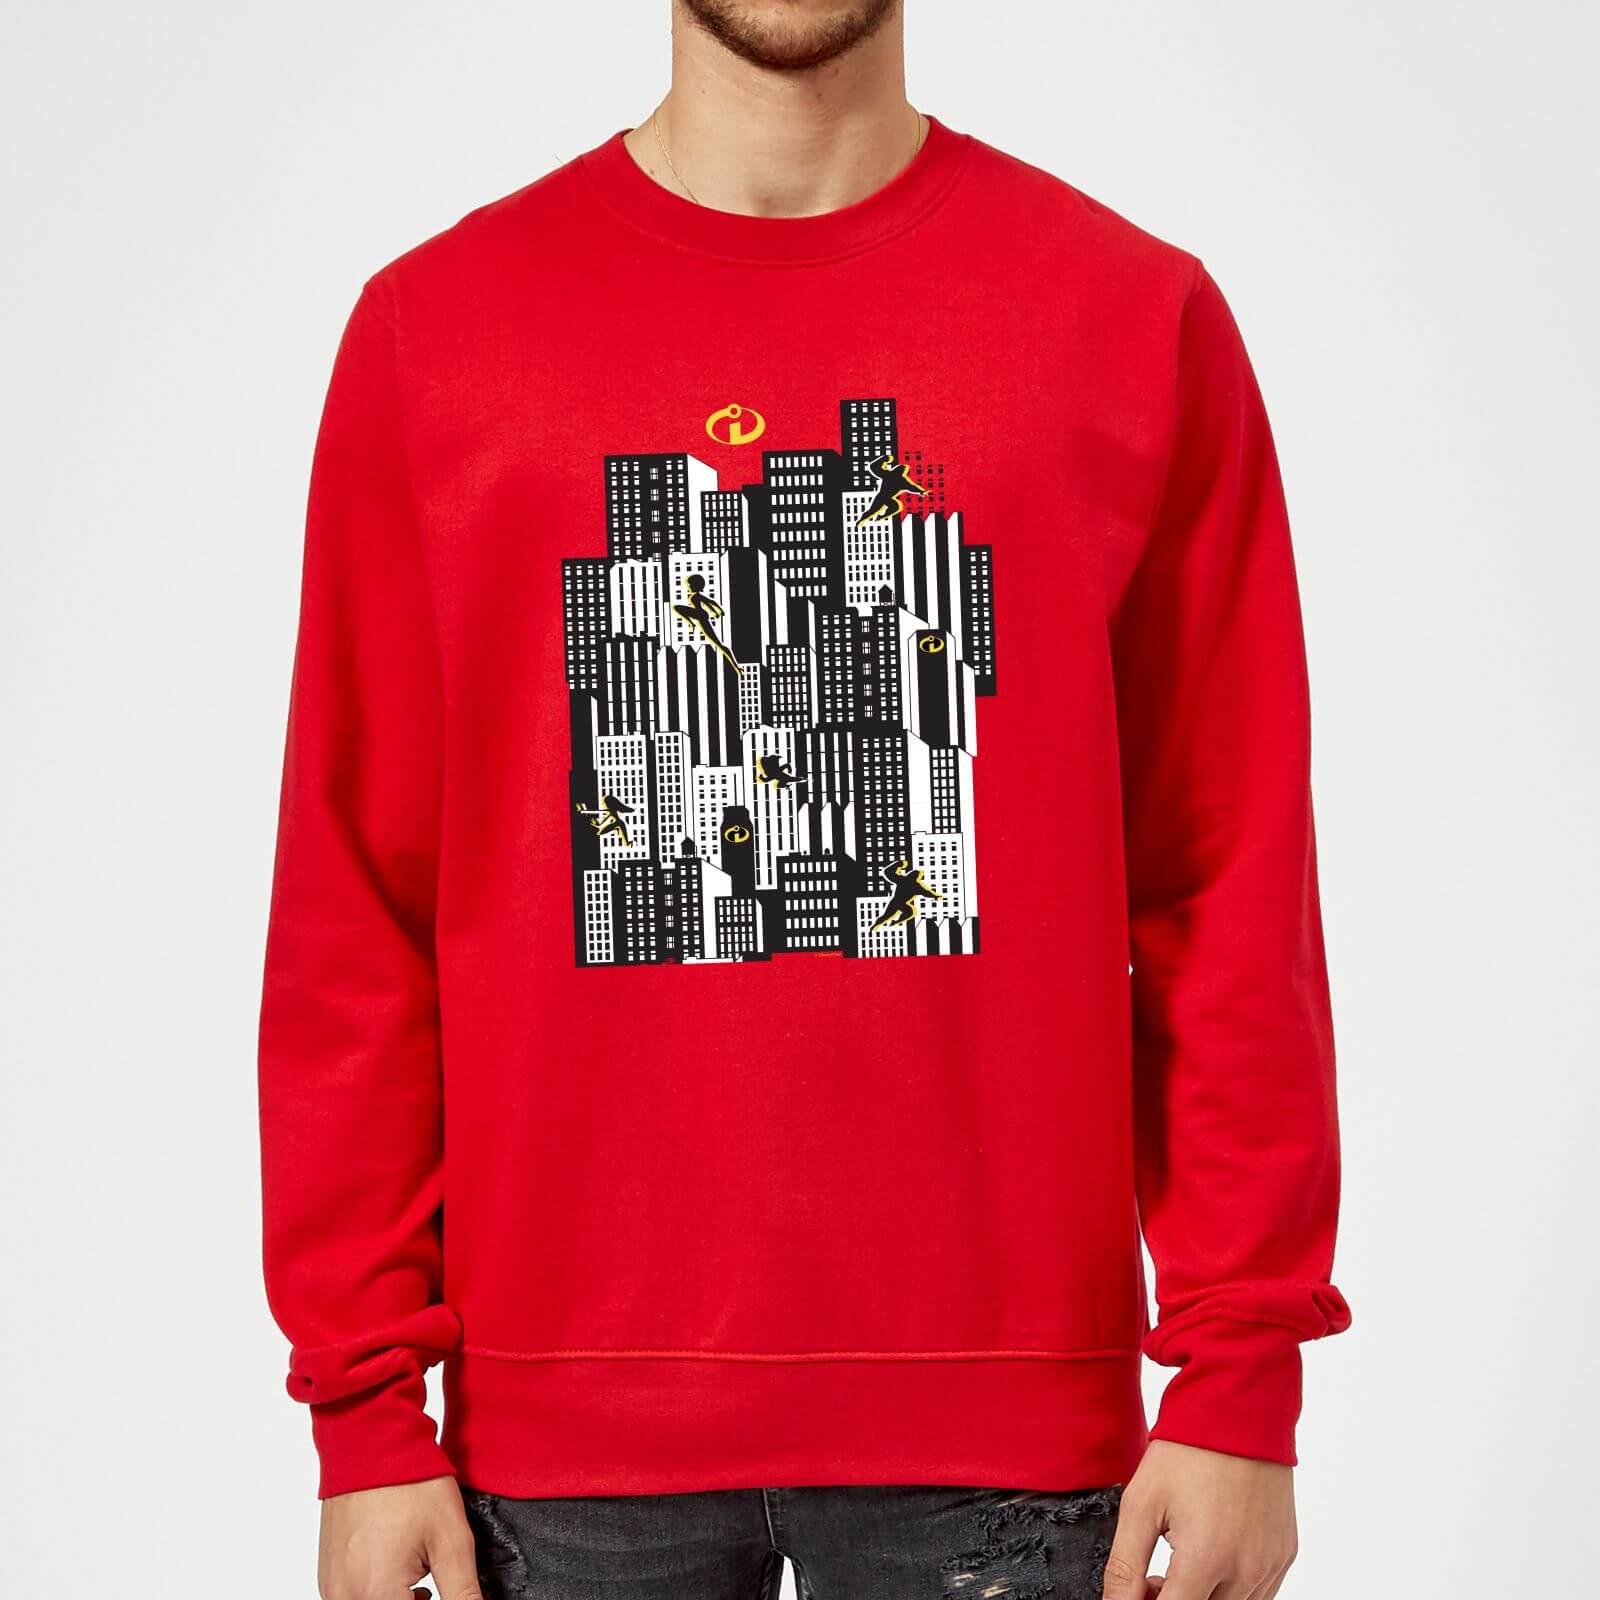 The Incredibles 2 Skyline Sweatshirt - Red - L - Red